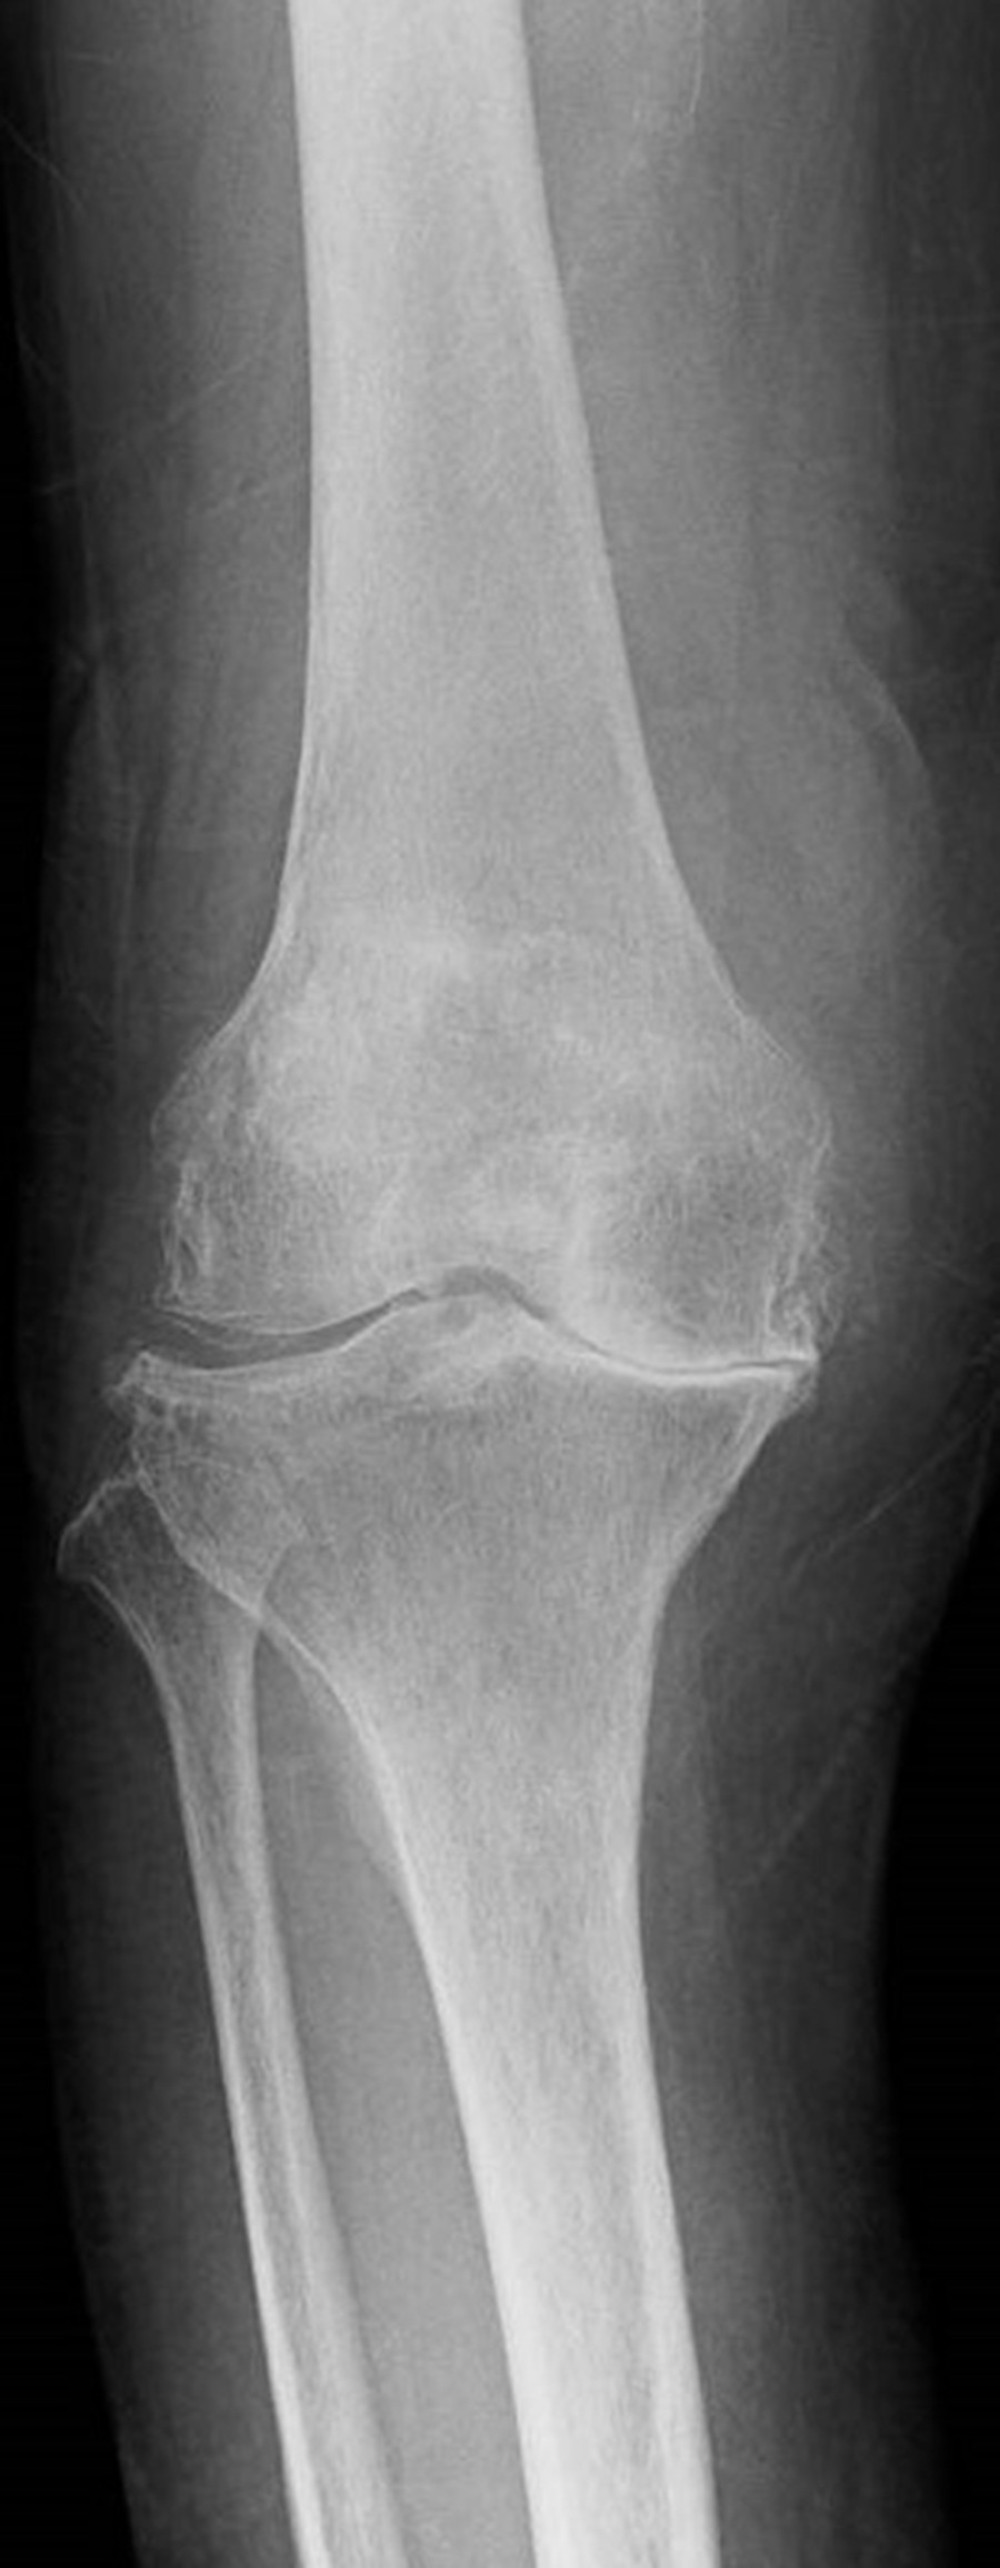 Anterior-posterior frontal view of right knee radiograph: Calcium deposits are observed in the right knee joint lateral meniscus together with medial compartment narrowing and diffuse osteophytes consistent with chondrocalcinosis, pseudogout, and osteoarthritis.